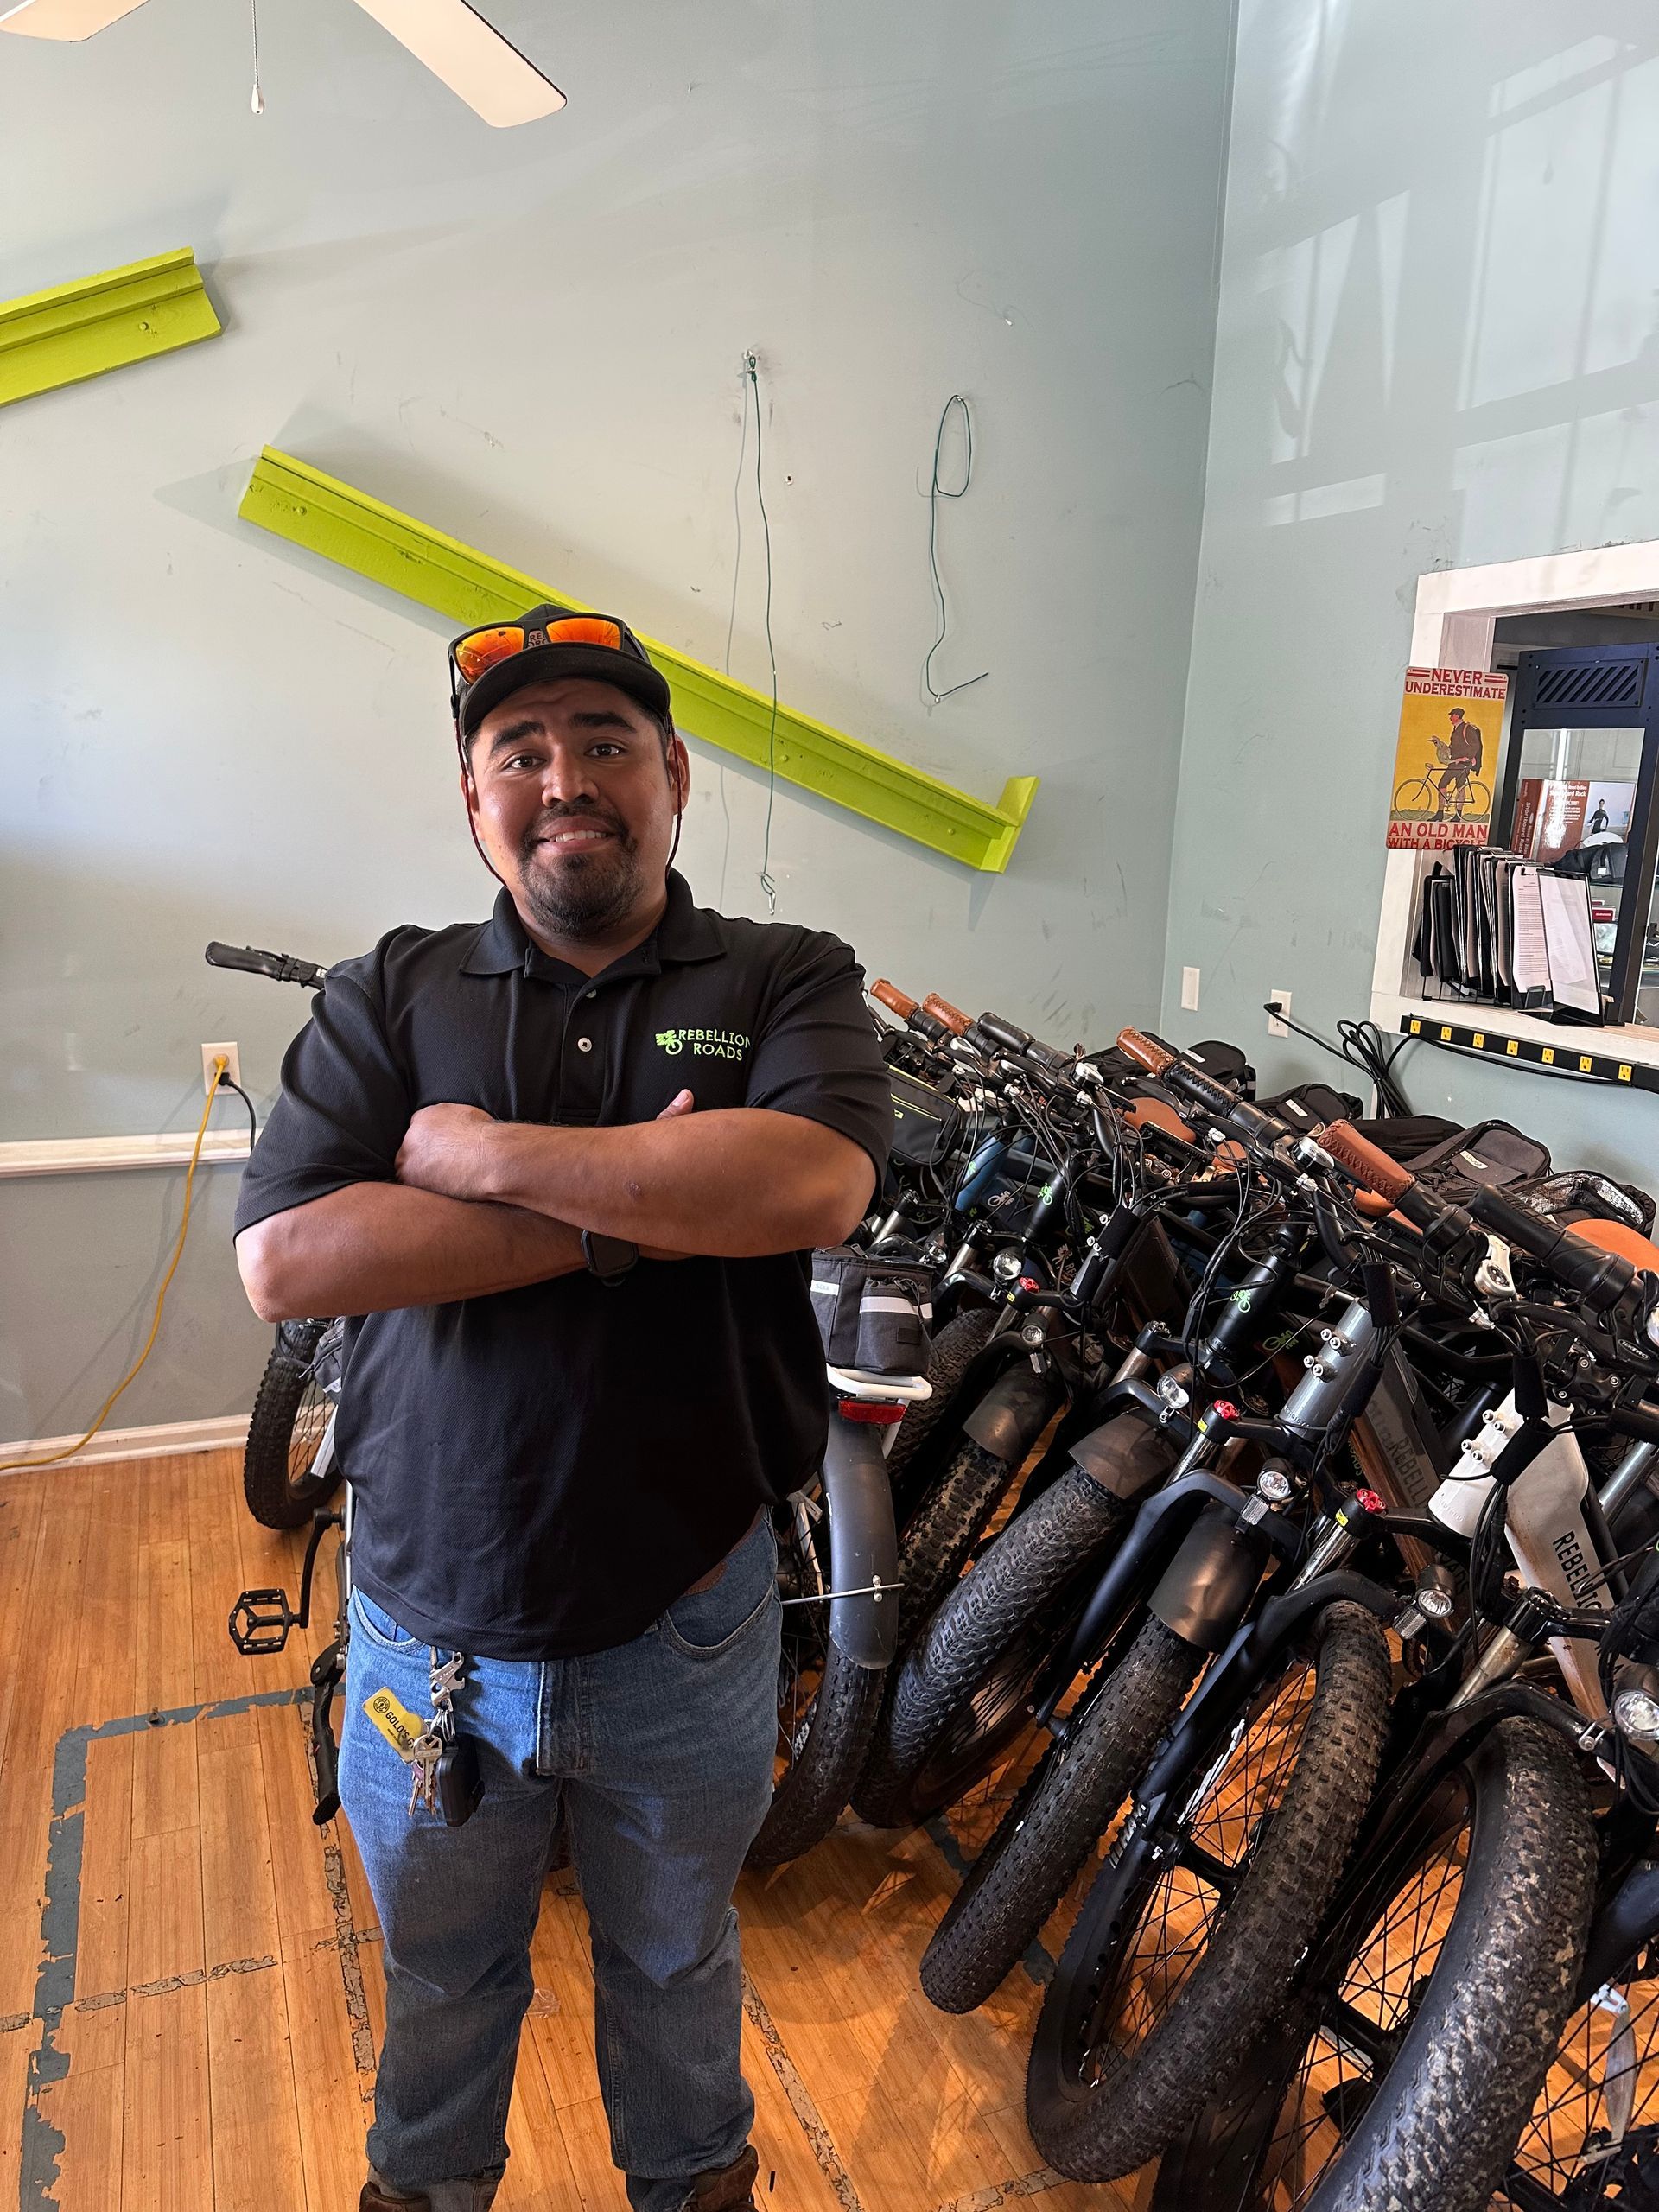 Our Tour guide in front of a row of ebikes.